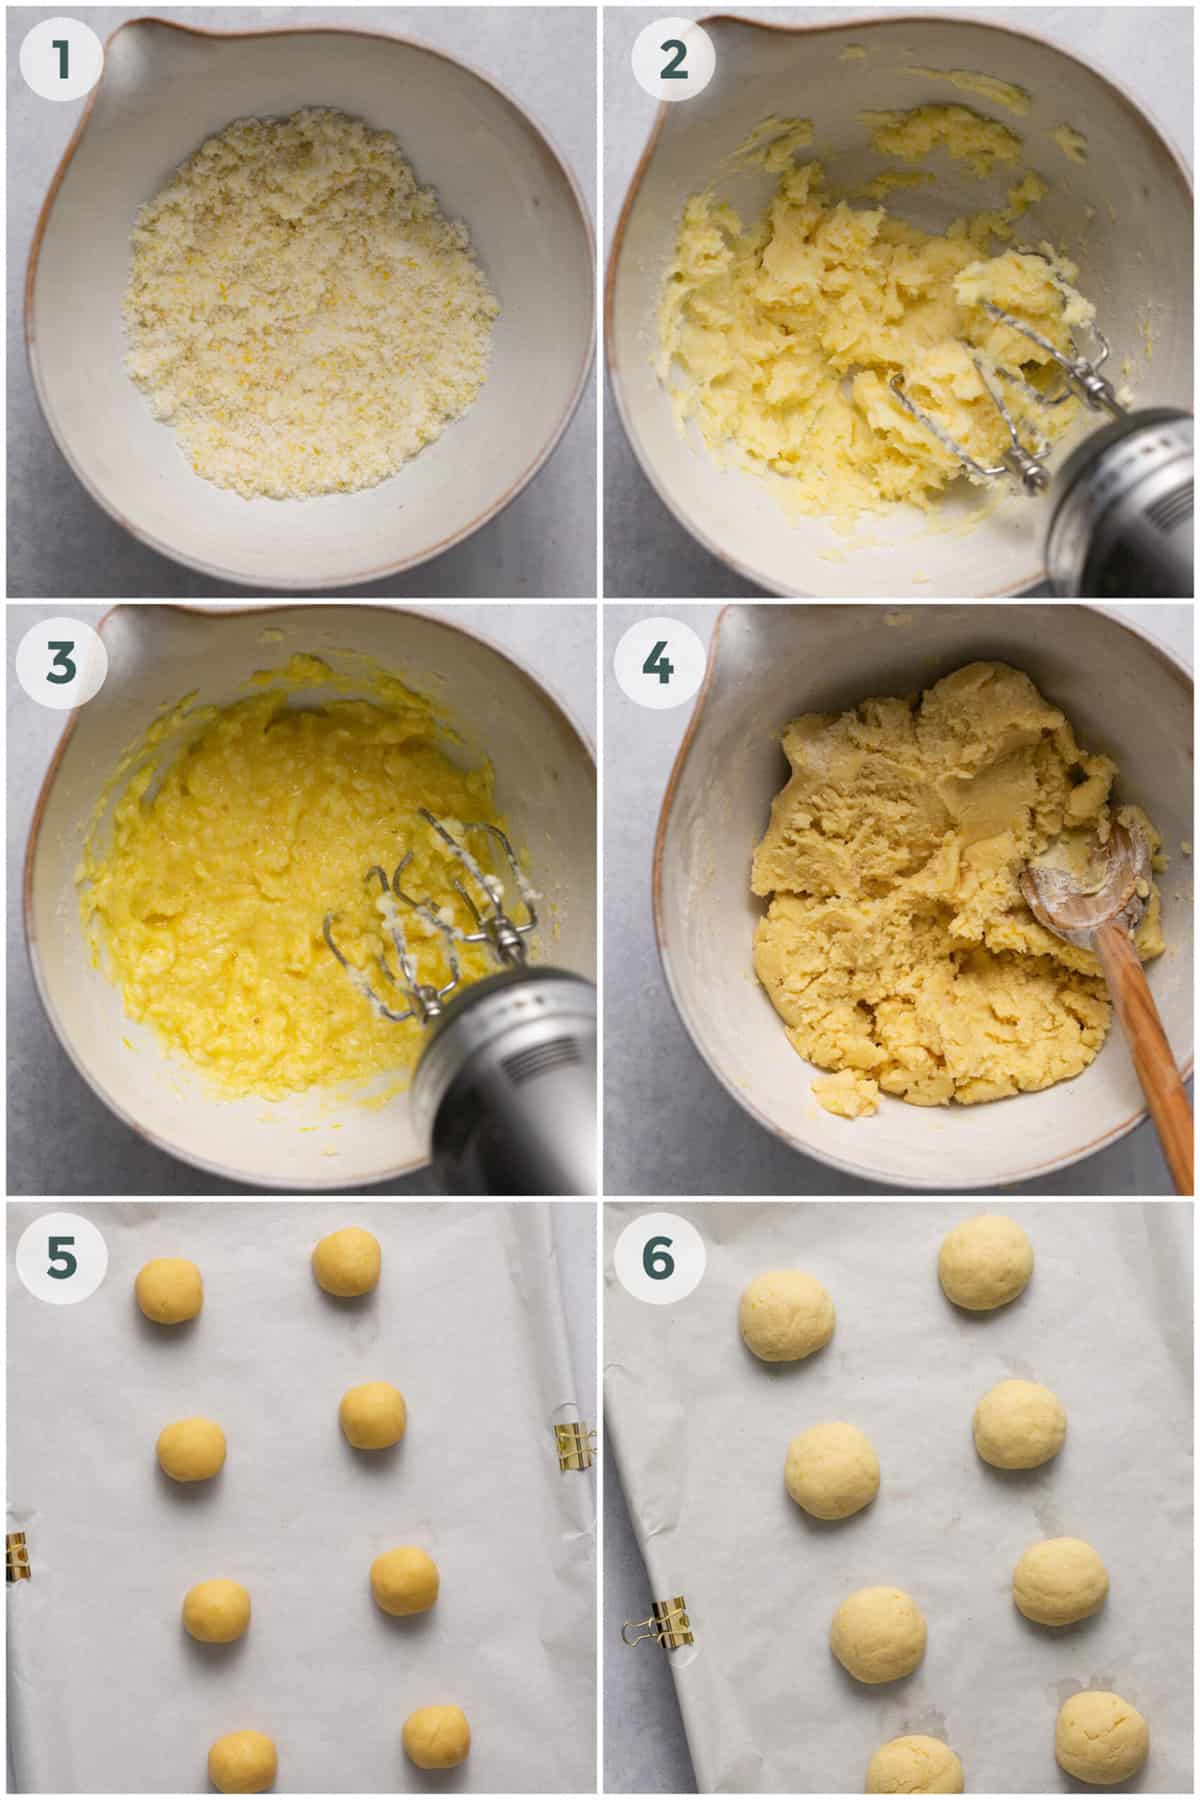 The first six steps to preparing a lemon biscuit recipe